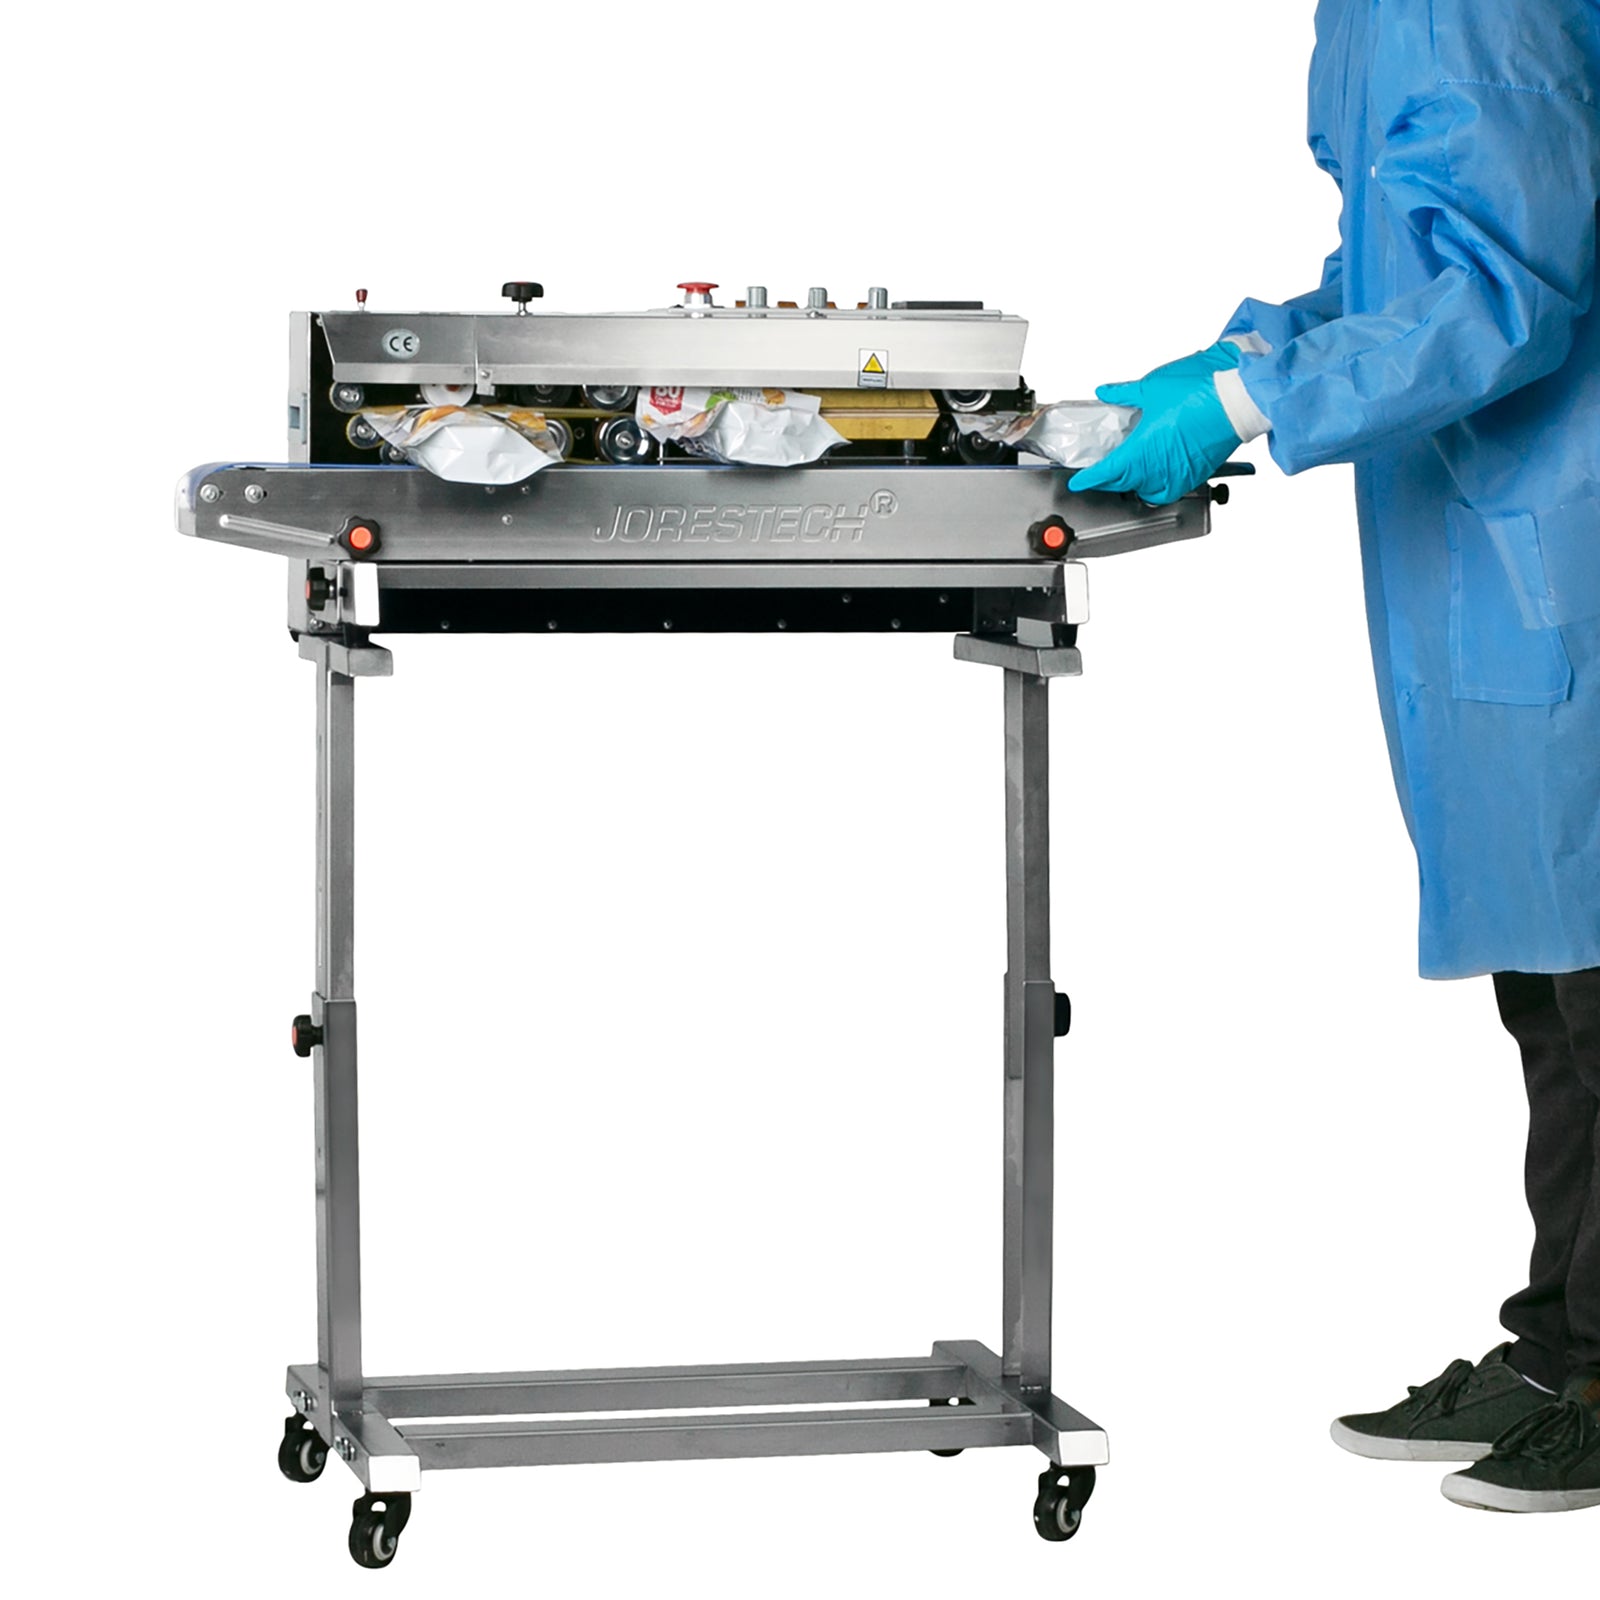 Continuous band sealer plced on top of the stainless steel stand compatible with this sealer